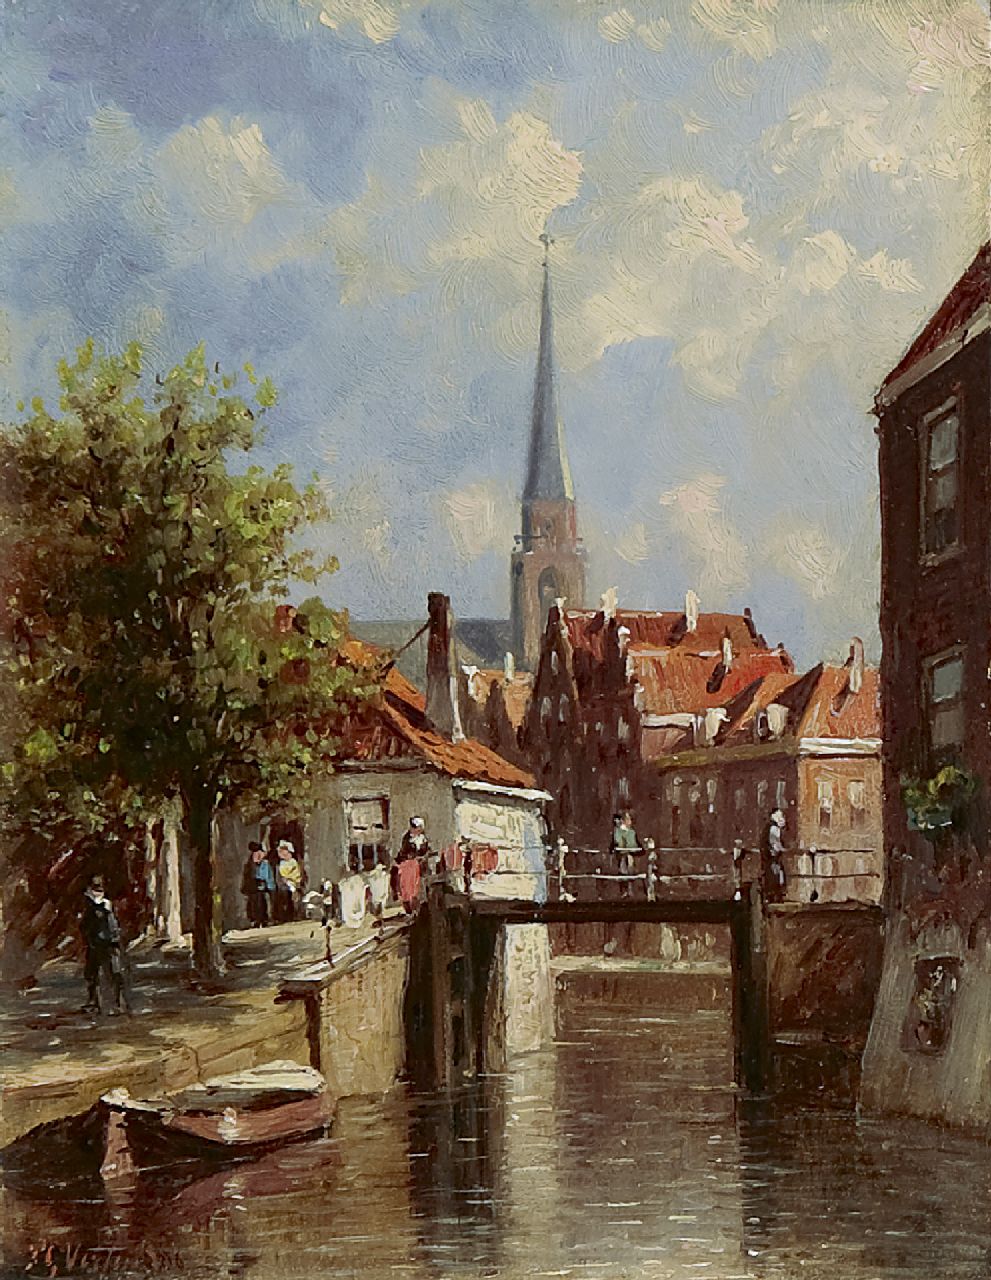 Vertin P.G.  | Petrus Gerardus Vertin, A view of the Romeijnbrug in Oudewater, oil on panel 14.7 x 11.4 cm, signed l.l. and dated '86